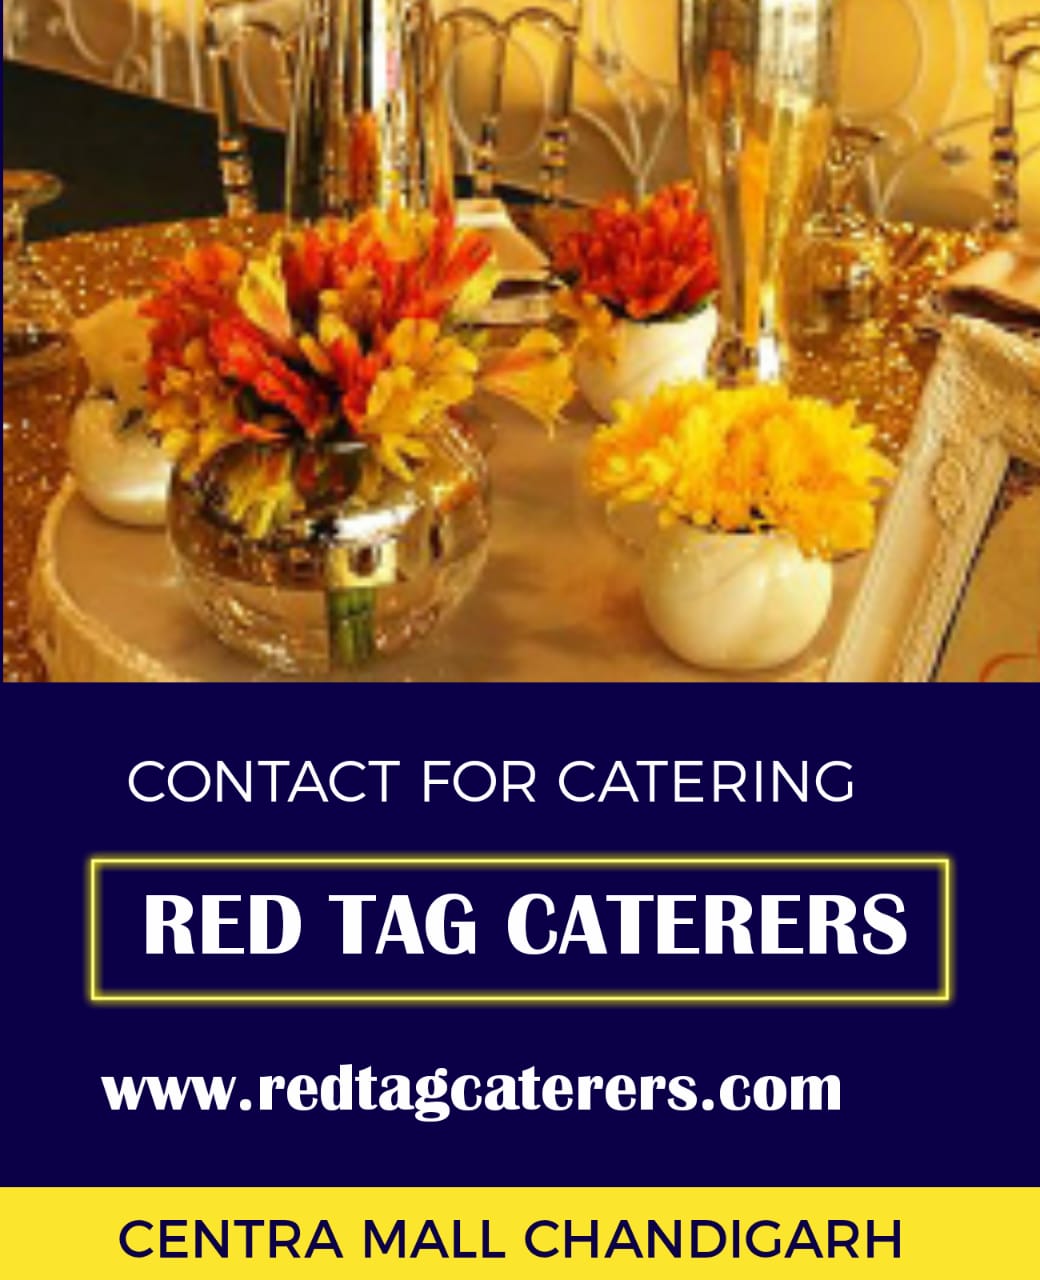 RED TAG caterers organization quality services catering in Chandigarh | Red Tag Caterers | quality services catering in Chandigarh, best organization catering in Chandigarh, bestinstitutional catering in Chandigarh, reputed catering in Chandigarh, best corporate eventscatering in Chandigarh - GL46299